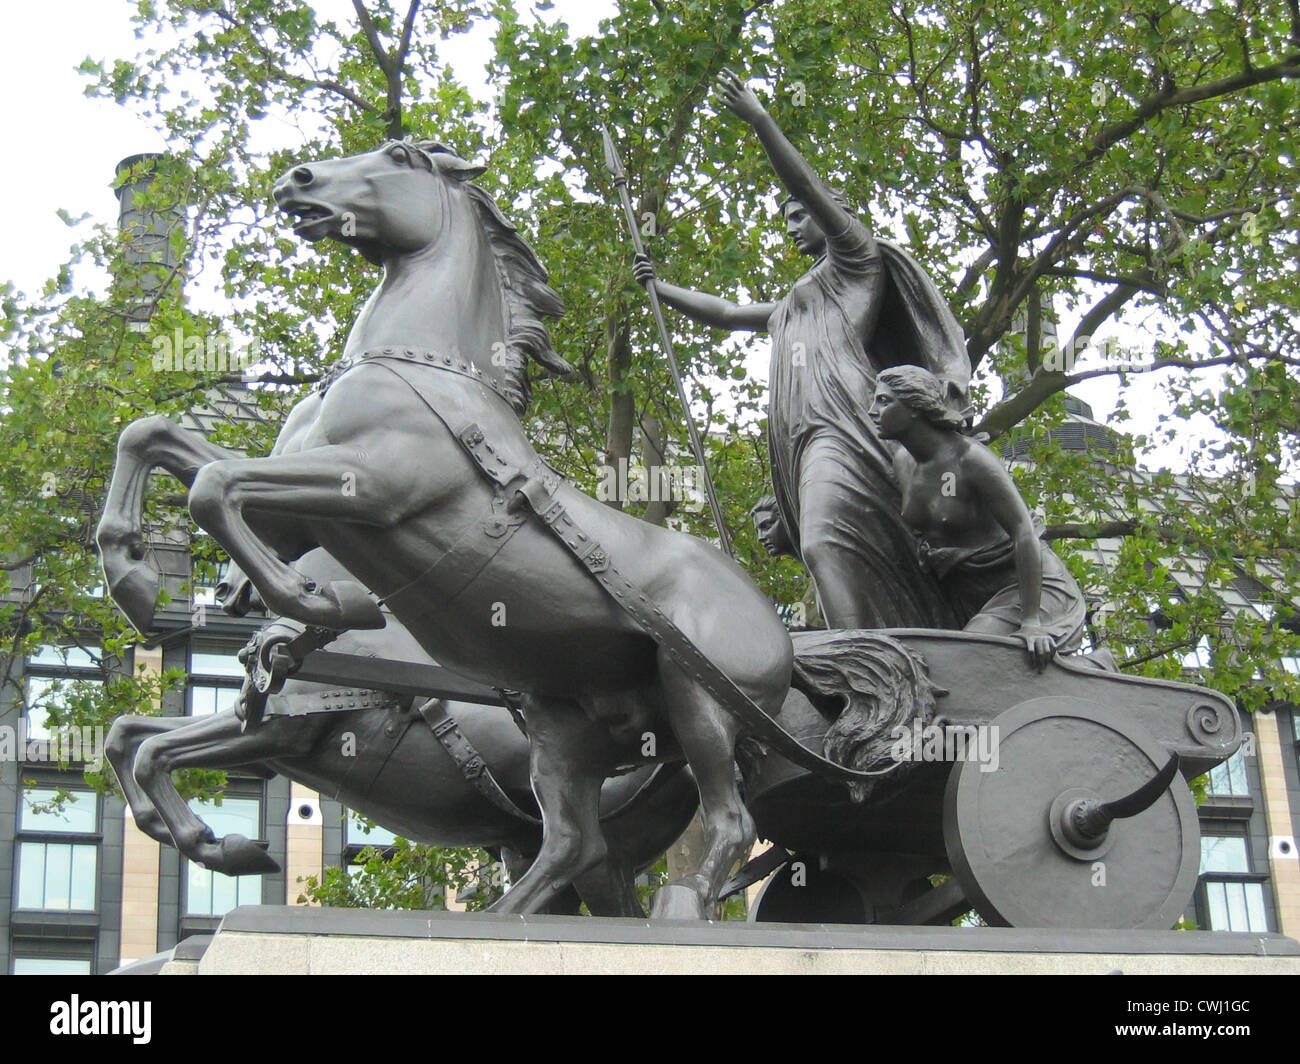 The Boudica statue in London by the Thames. Stock Photo